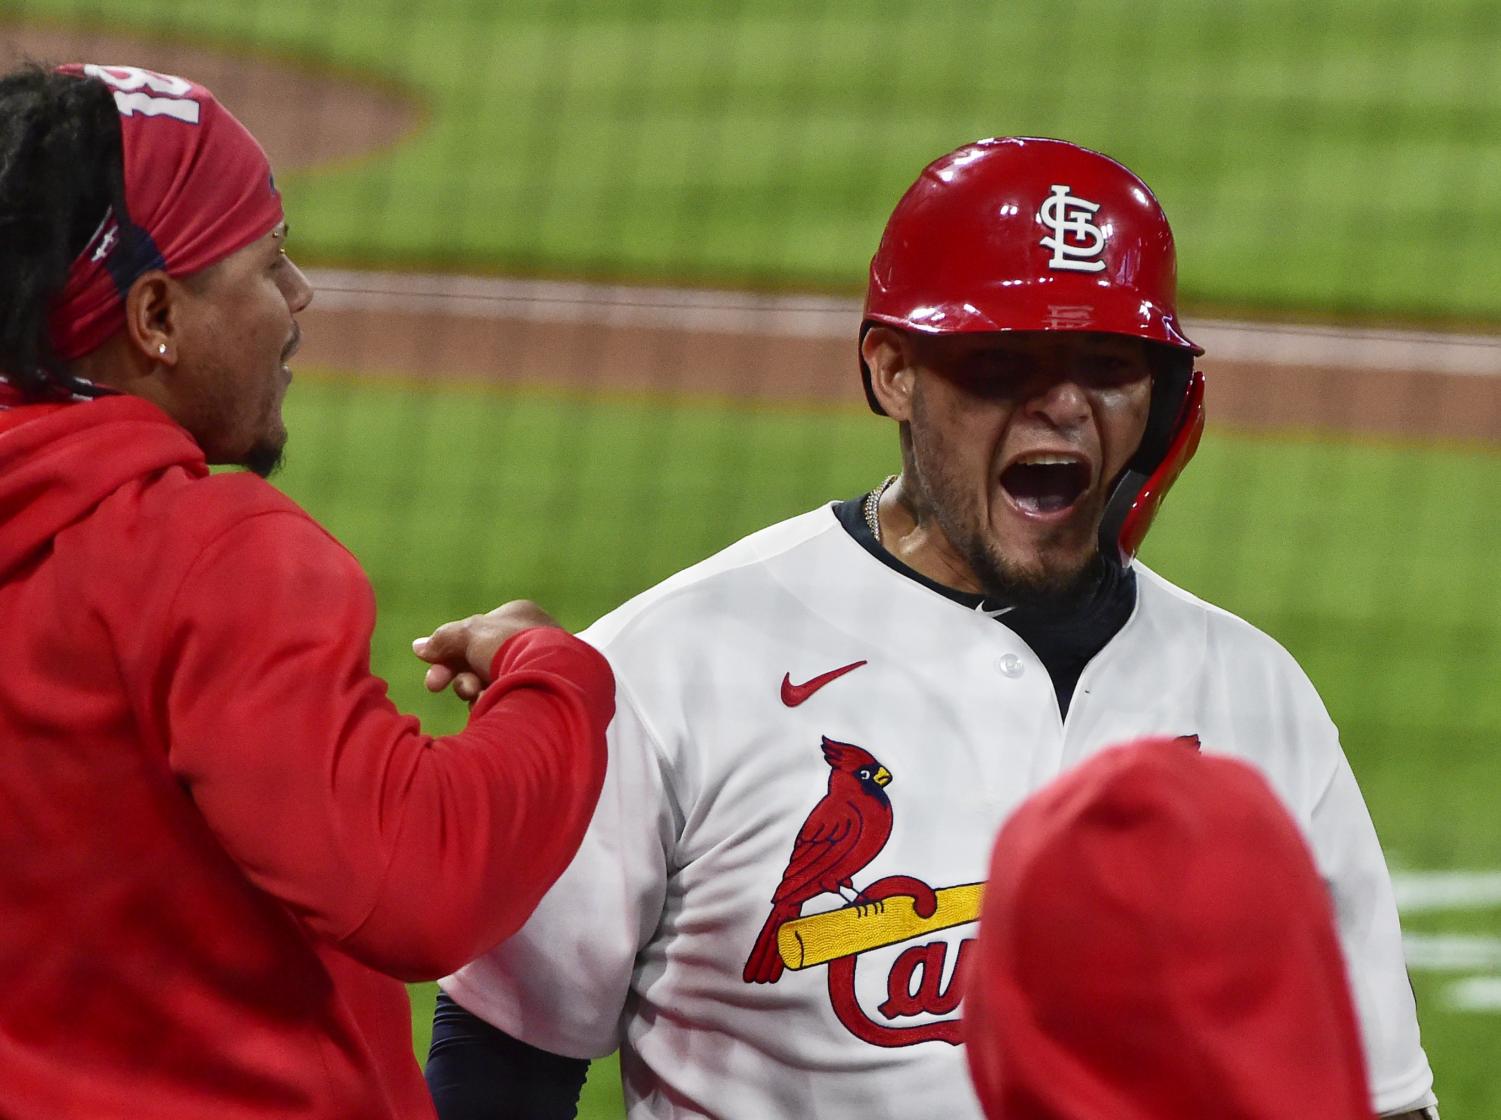 Cardinals catcher Yadier Molina says he wants to be the best ever